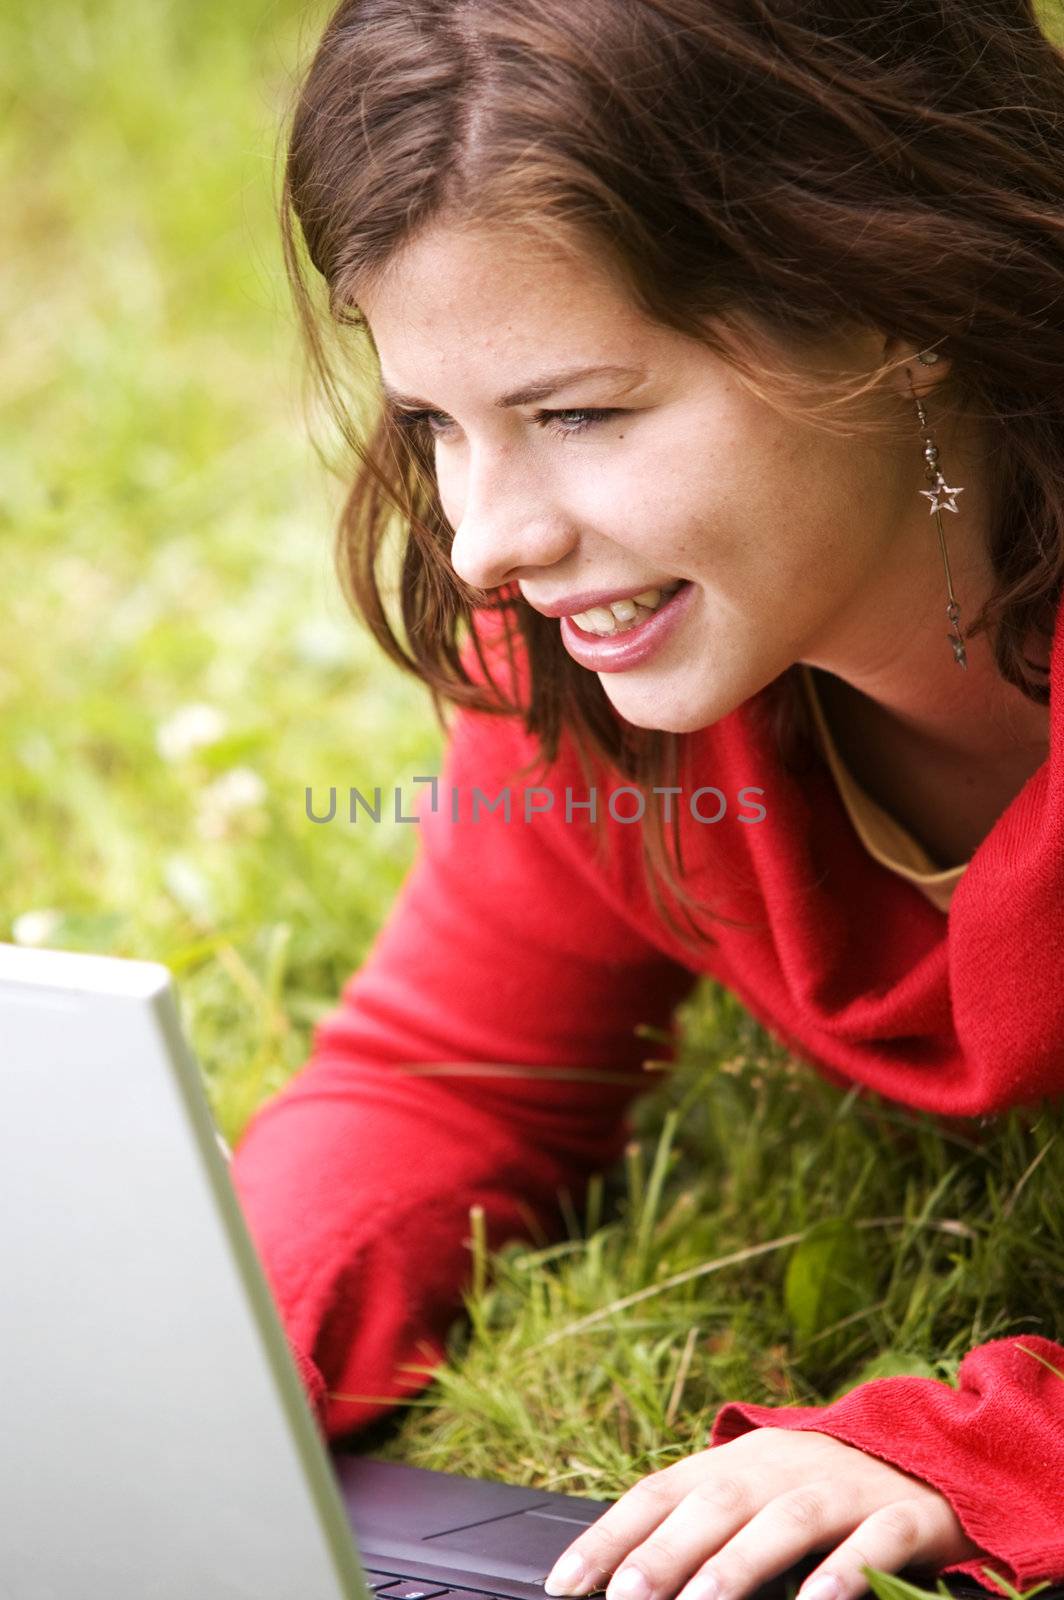 A beutiful student girl working on her laptop outdoor at sunny day